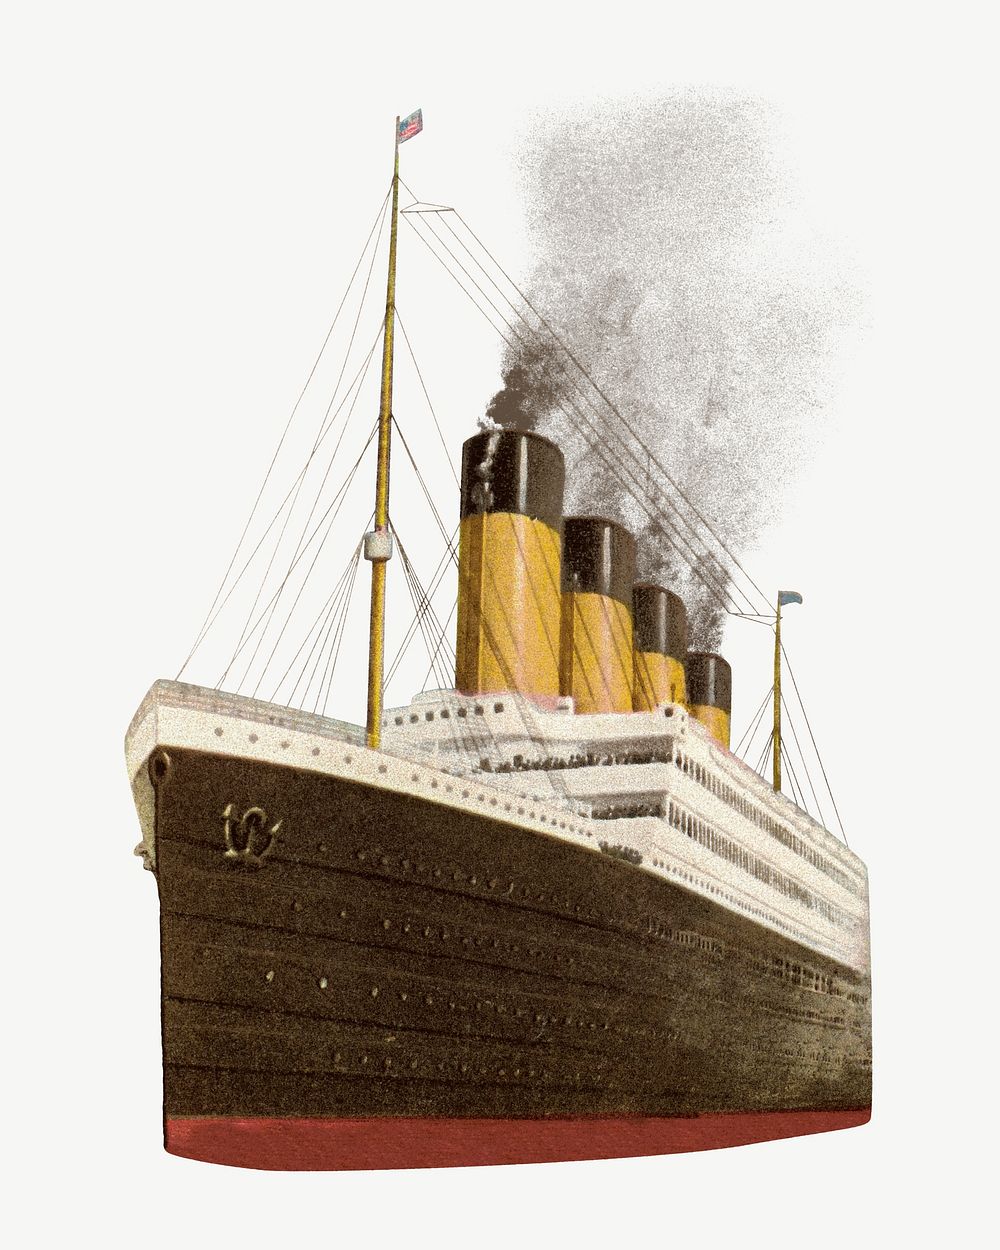 Vintage cruise ship chromolithograph art psd. Remixed by rawpixel. 